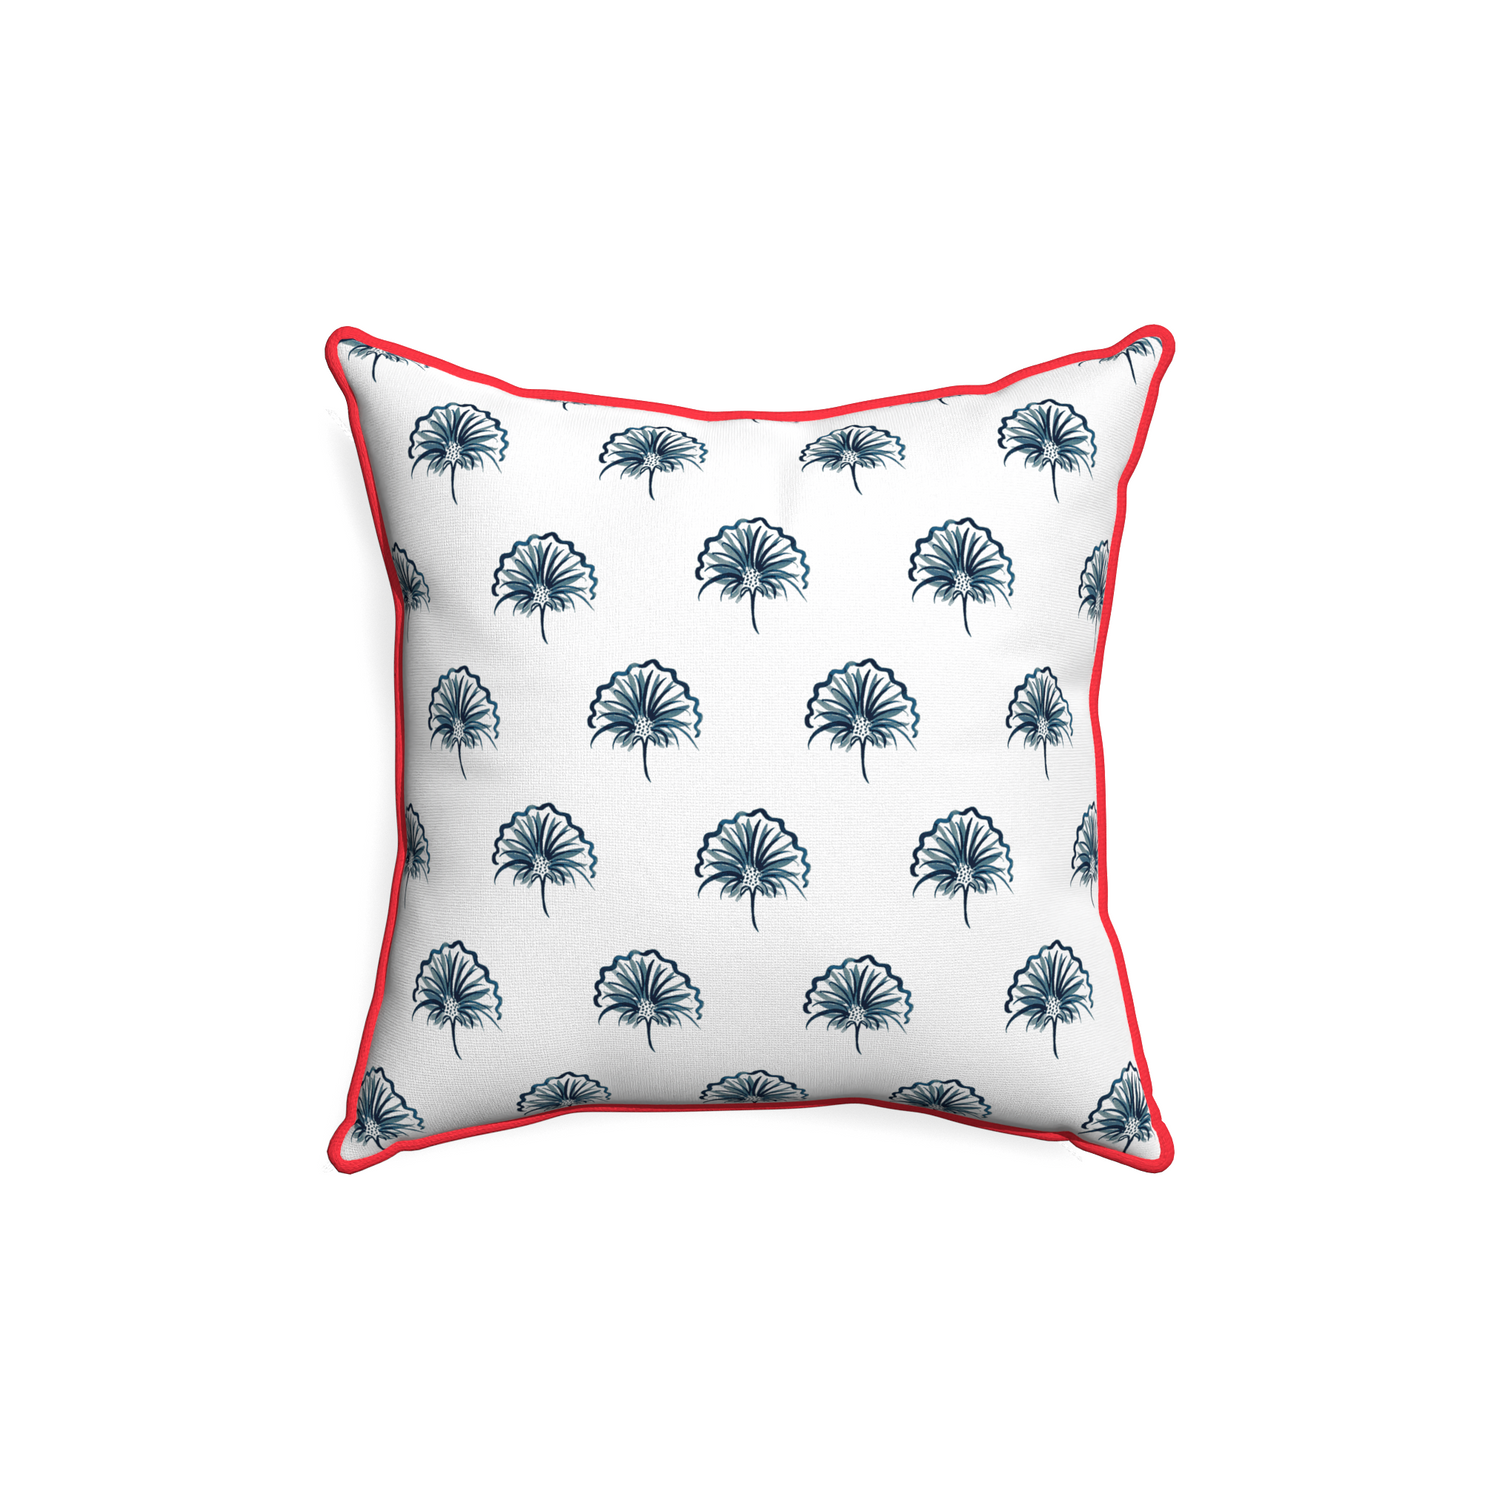 18-square penelope midnight custom floral navypillow with cherry piping on white background